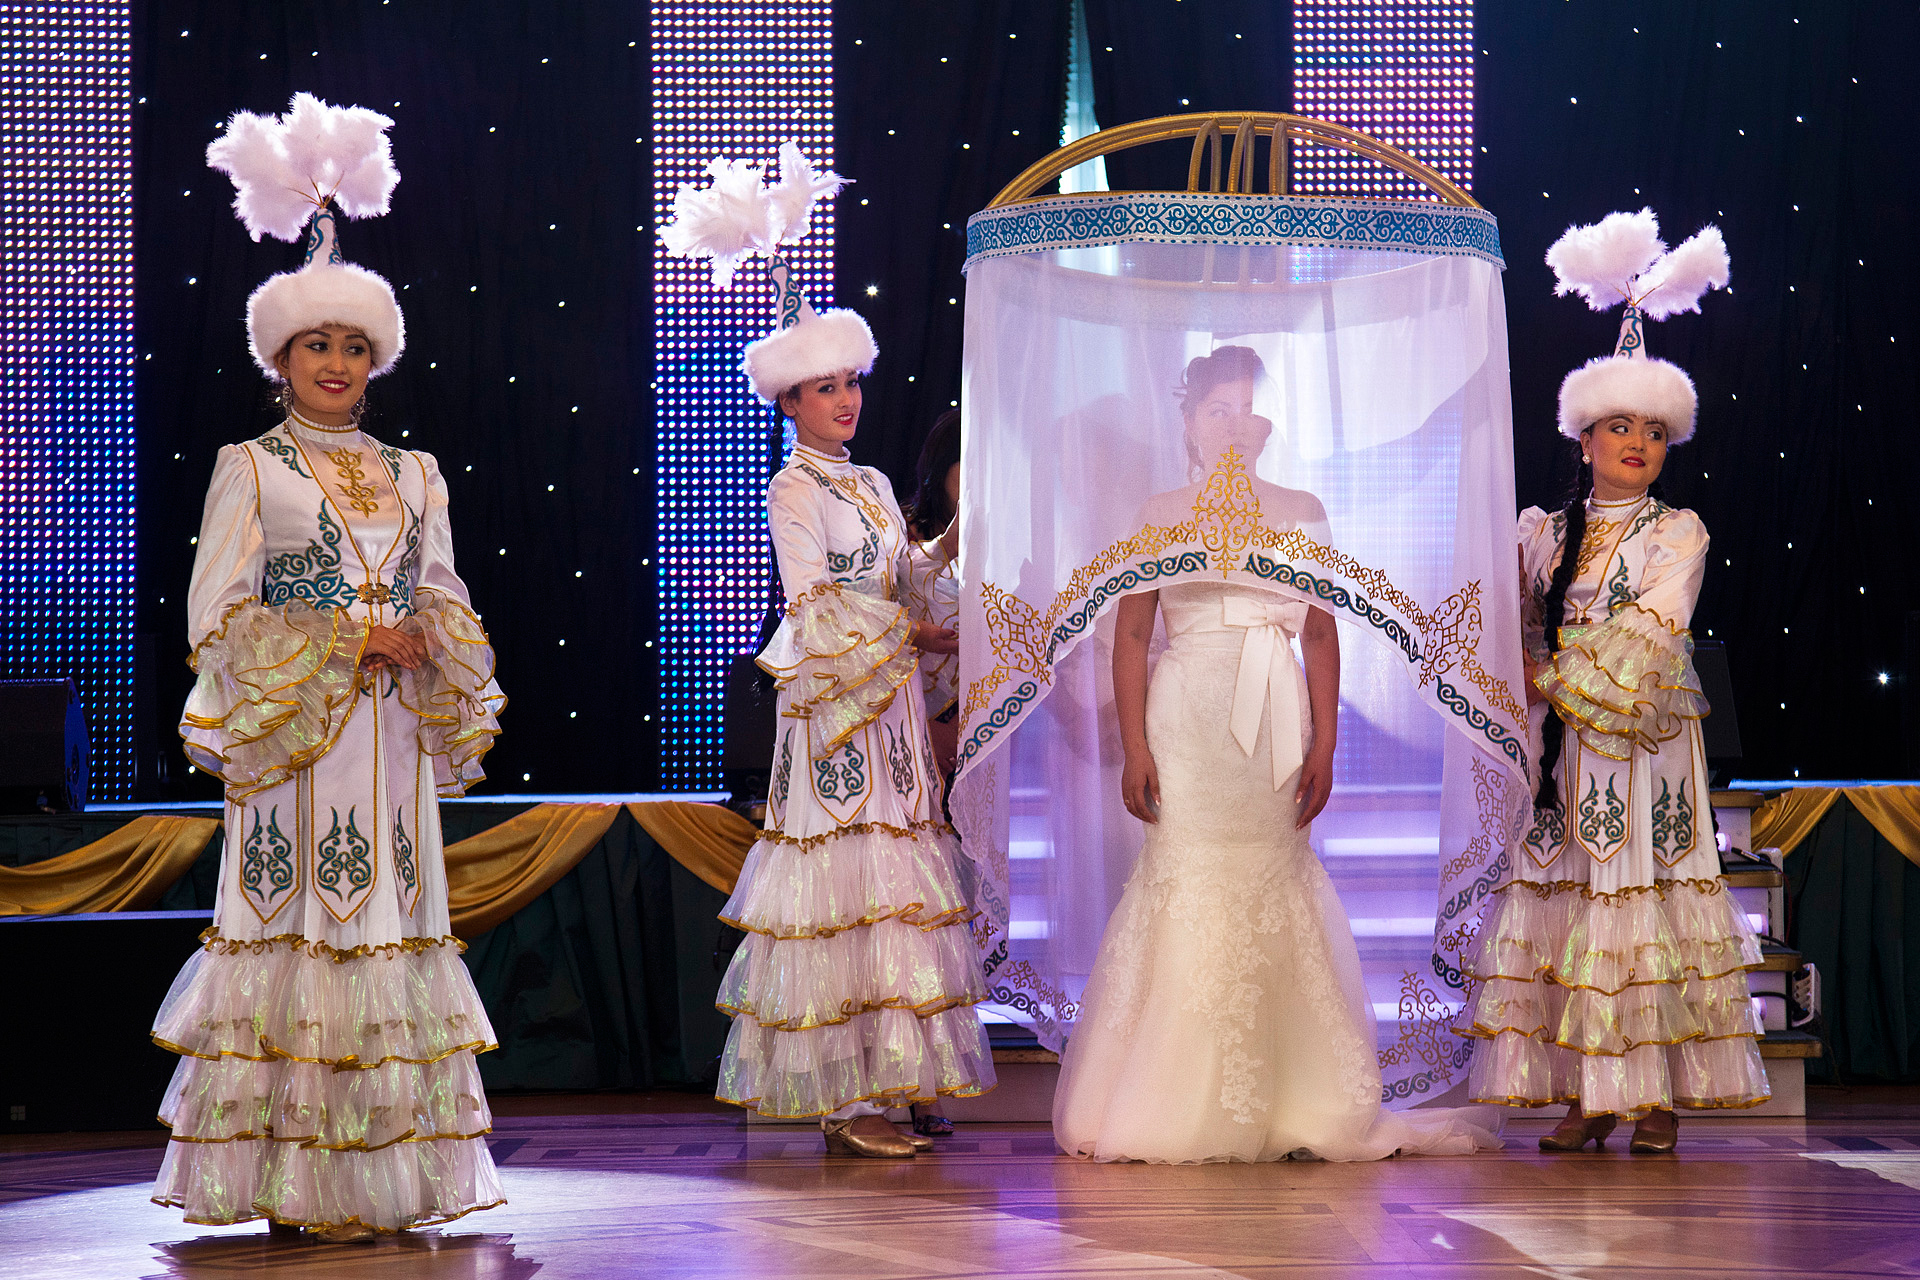  Flanked by traditional Kazakh dancers, a bride awaits her formal unveiling at an opulent wedding palace, where she has just been married in a ceremony capped by the release of two white doves. The revelry begins when the veil is lifted.  Astana, Kaz